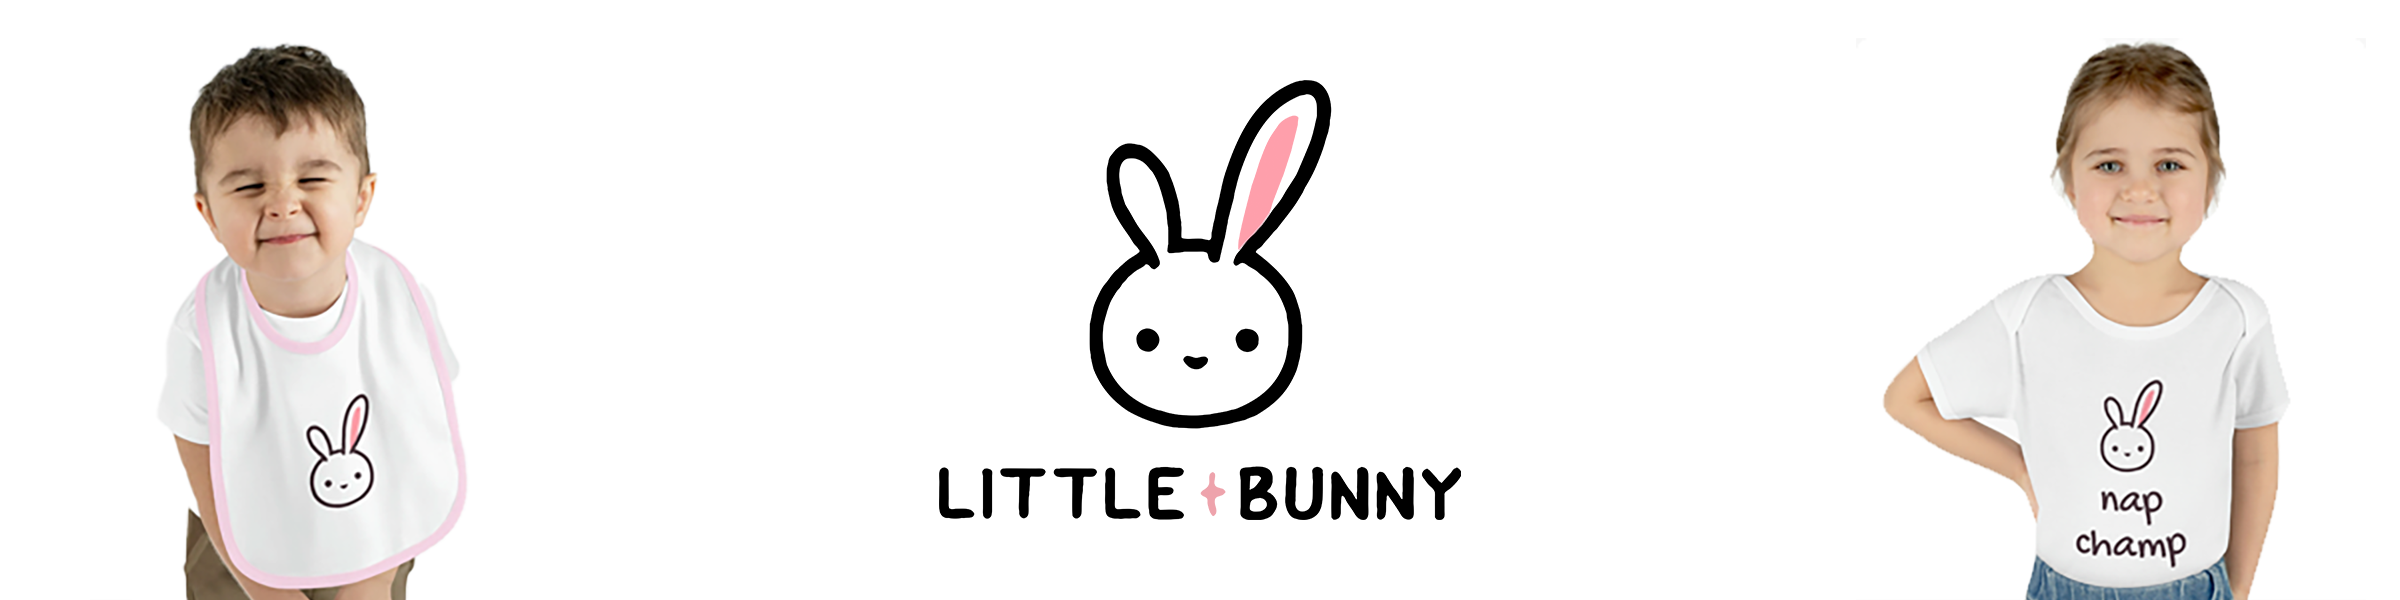 Little Bunny Clothing Story - boy and girl with the cute Little Bunny logo